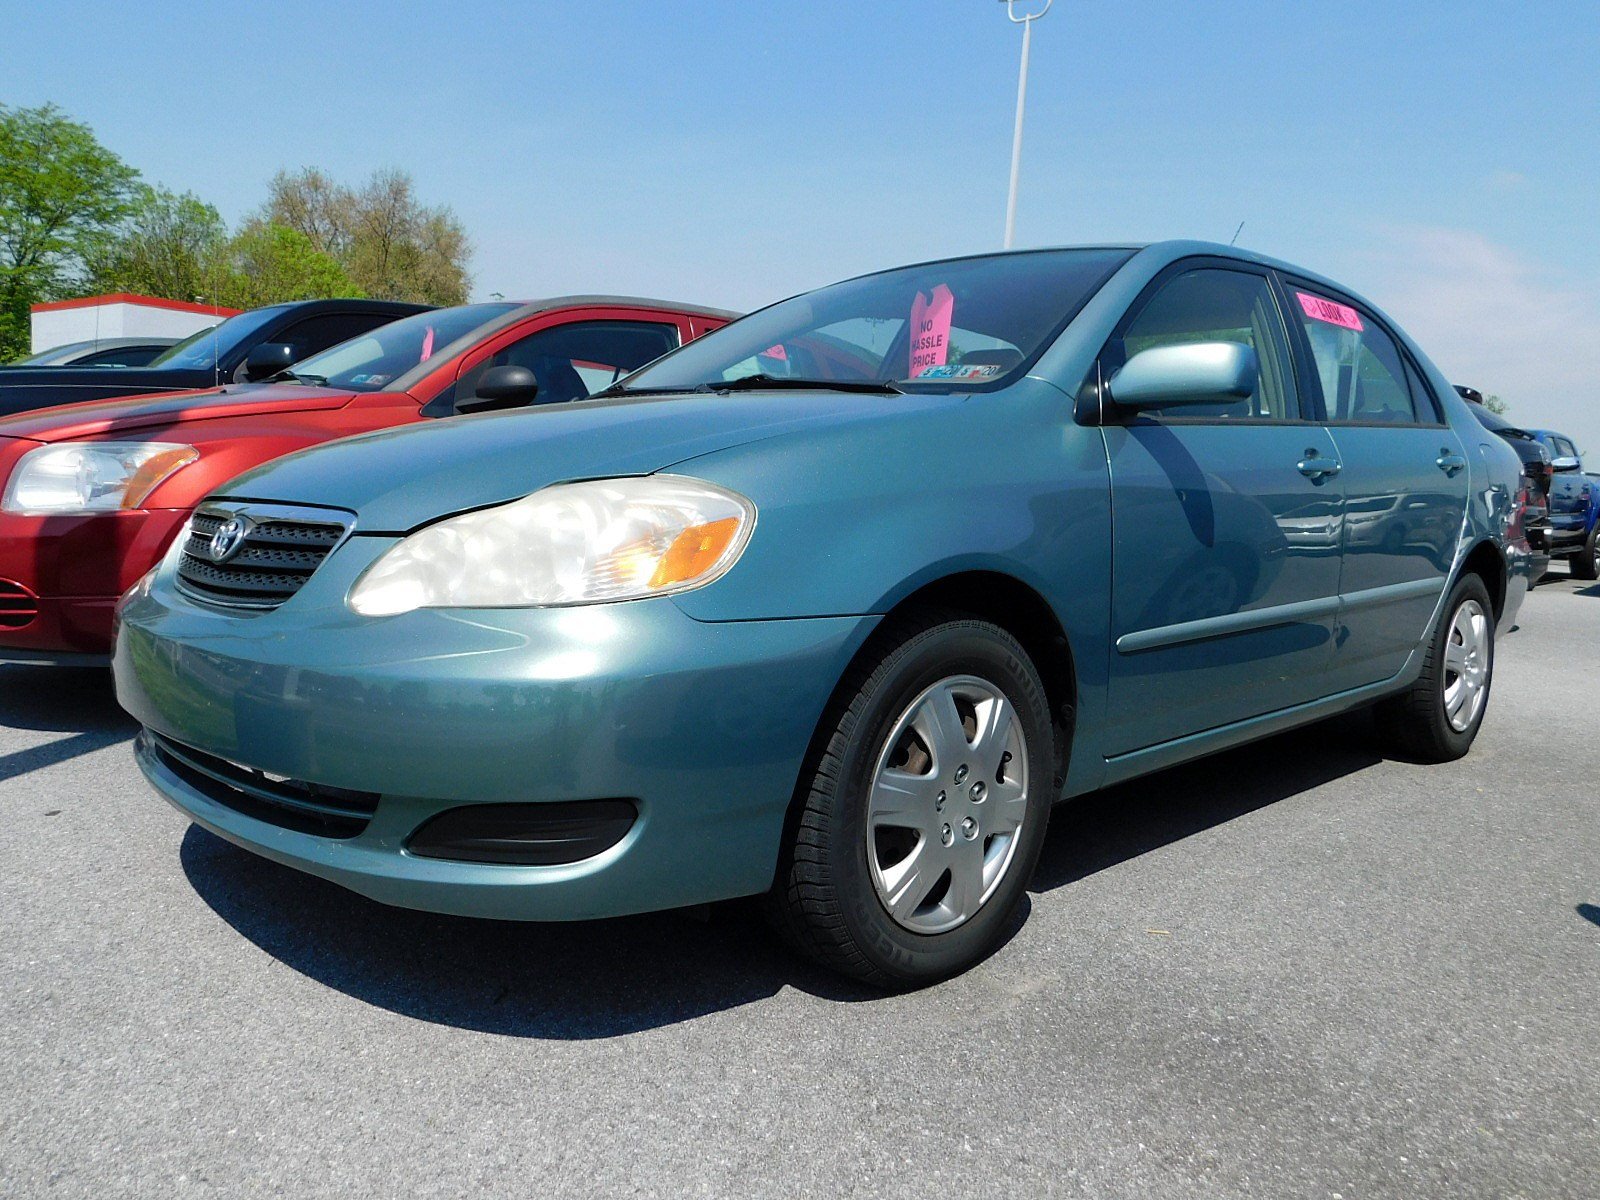 PreOwned 2005 Toyota Corolla LE 4dr Car in East